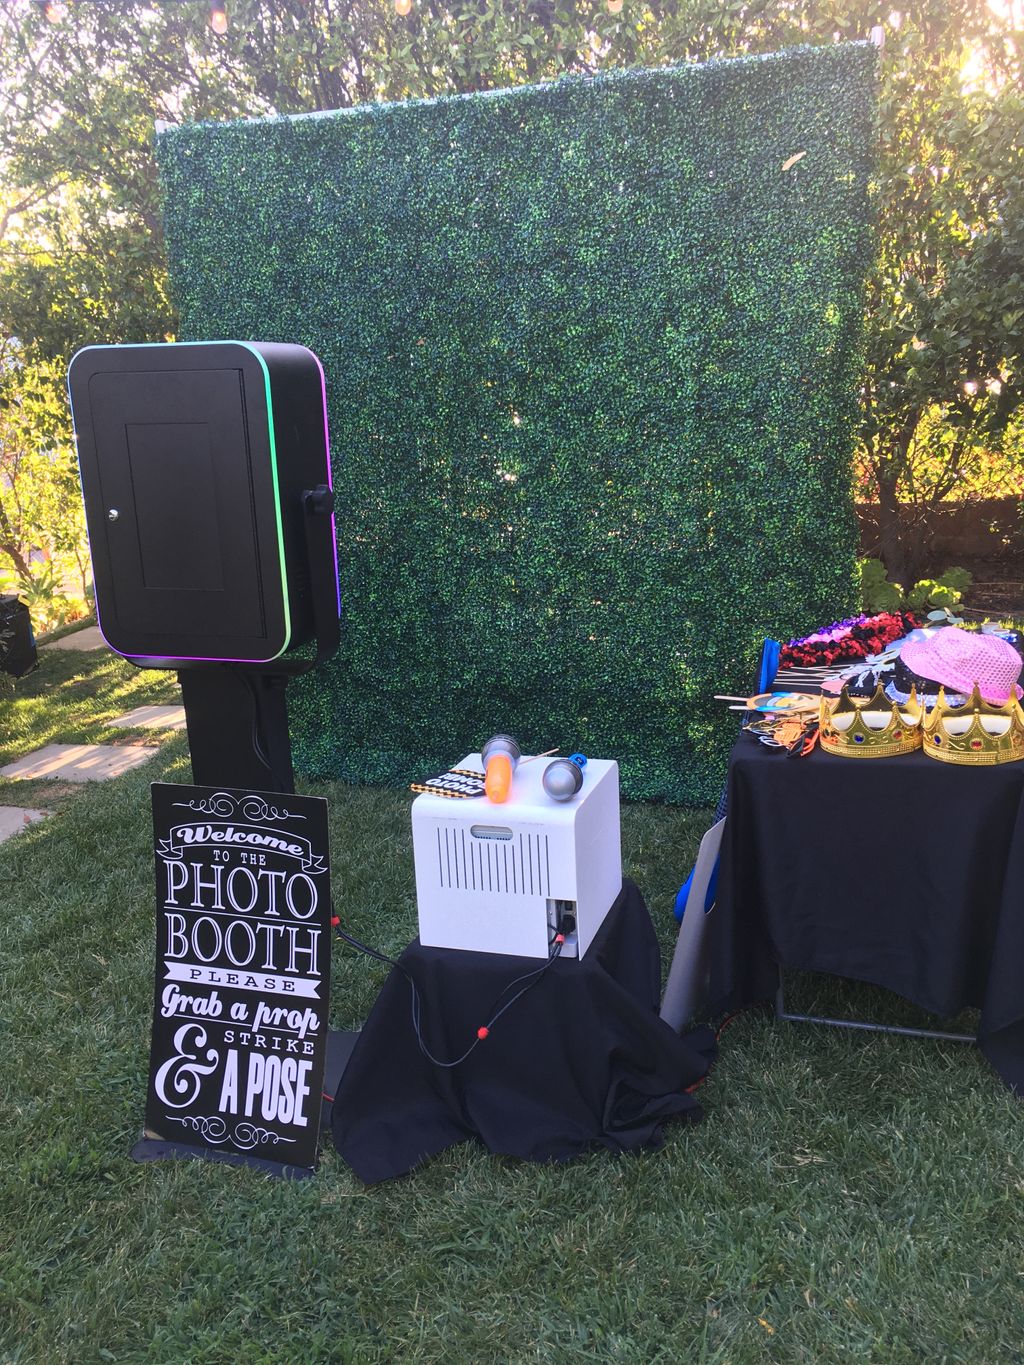 Pink Llama Party Rentals & Photo Booth Experience